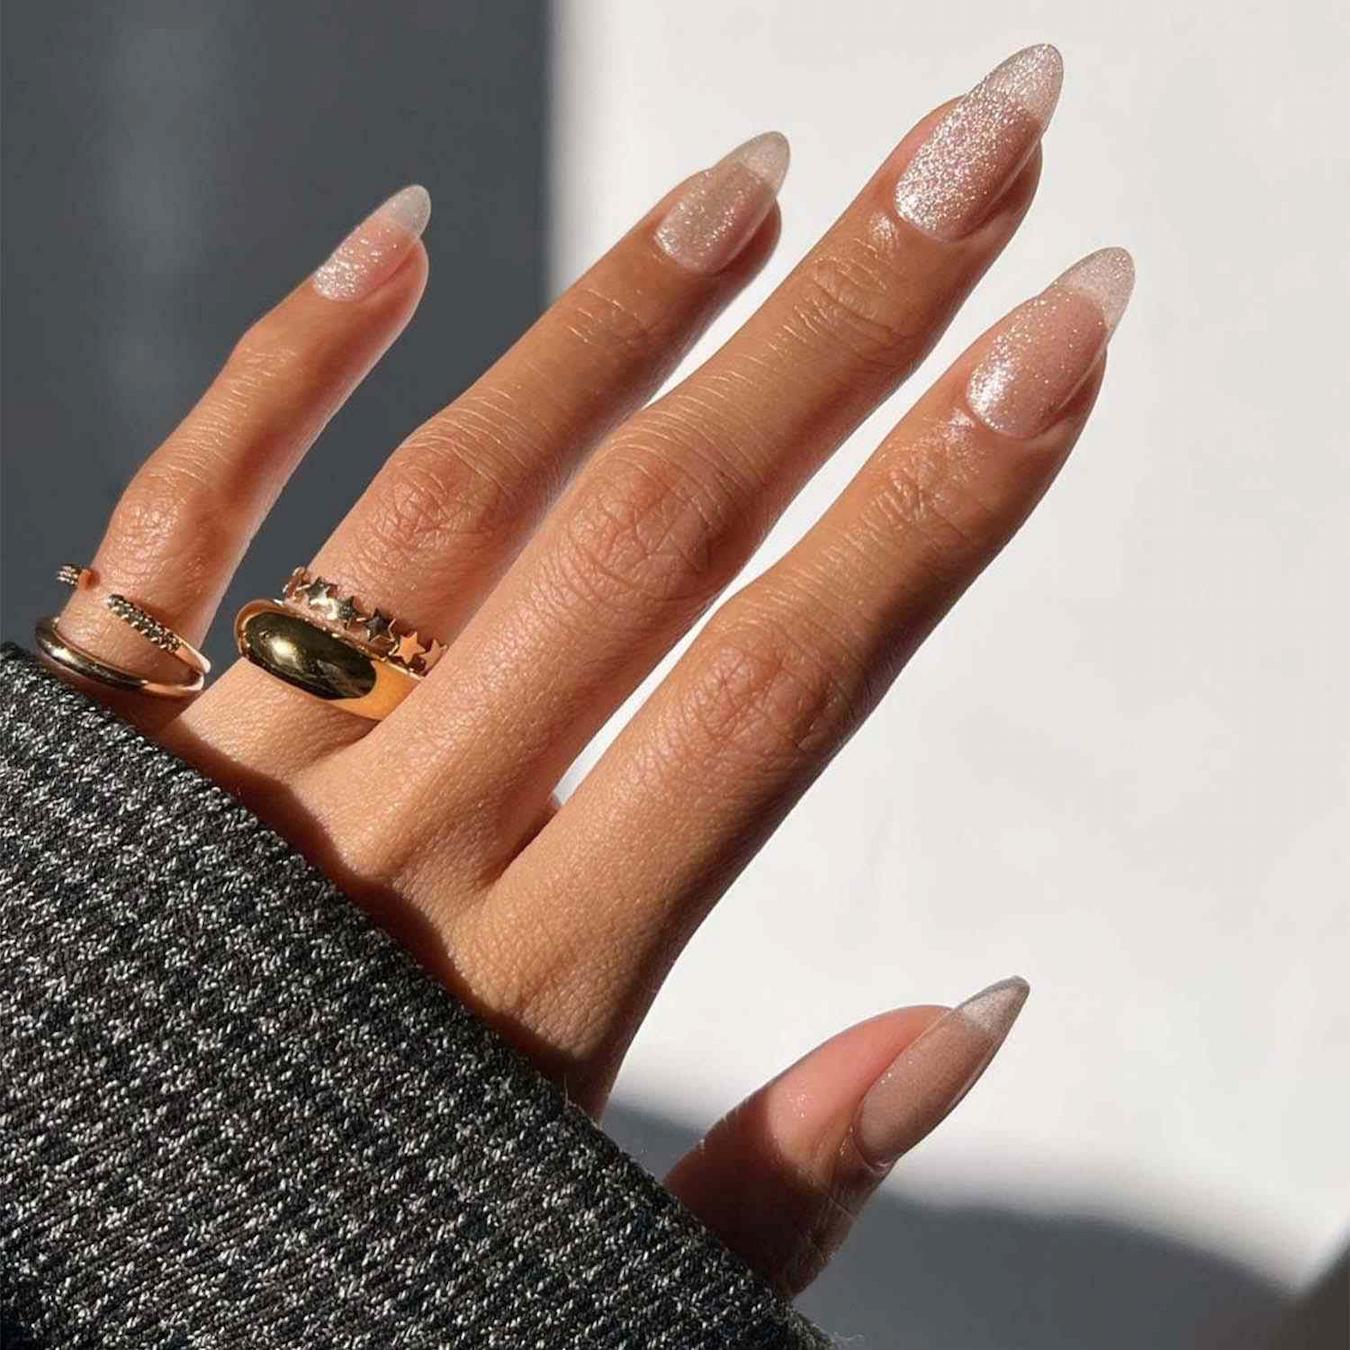 9 Best New Years Nails For A Dazzling 2024 – Maniology